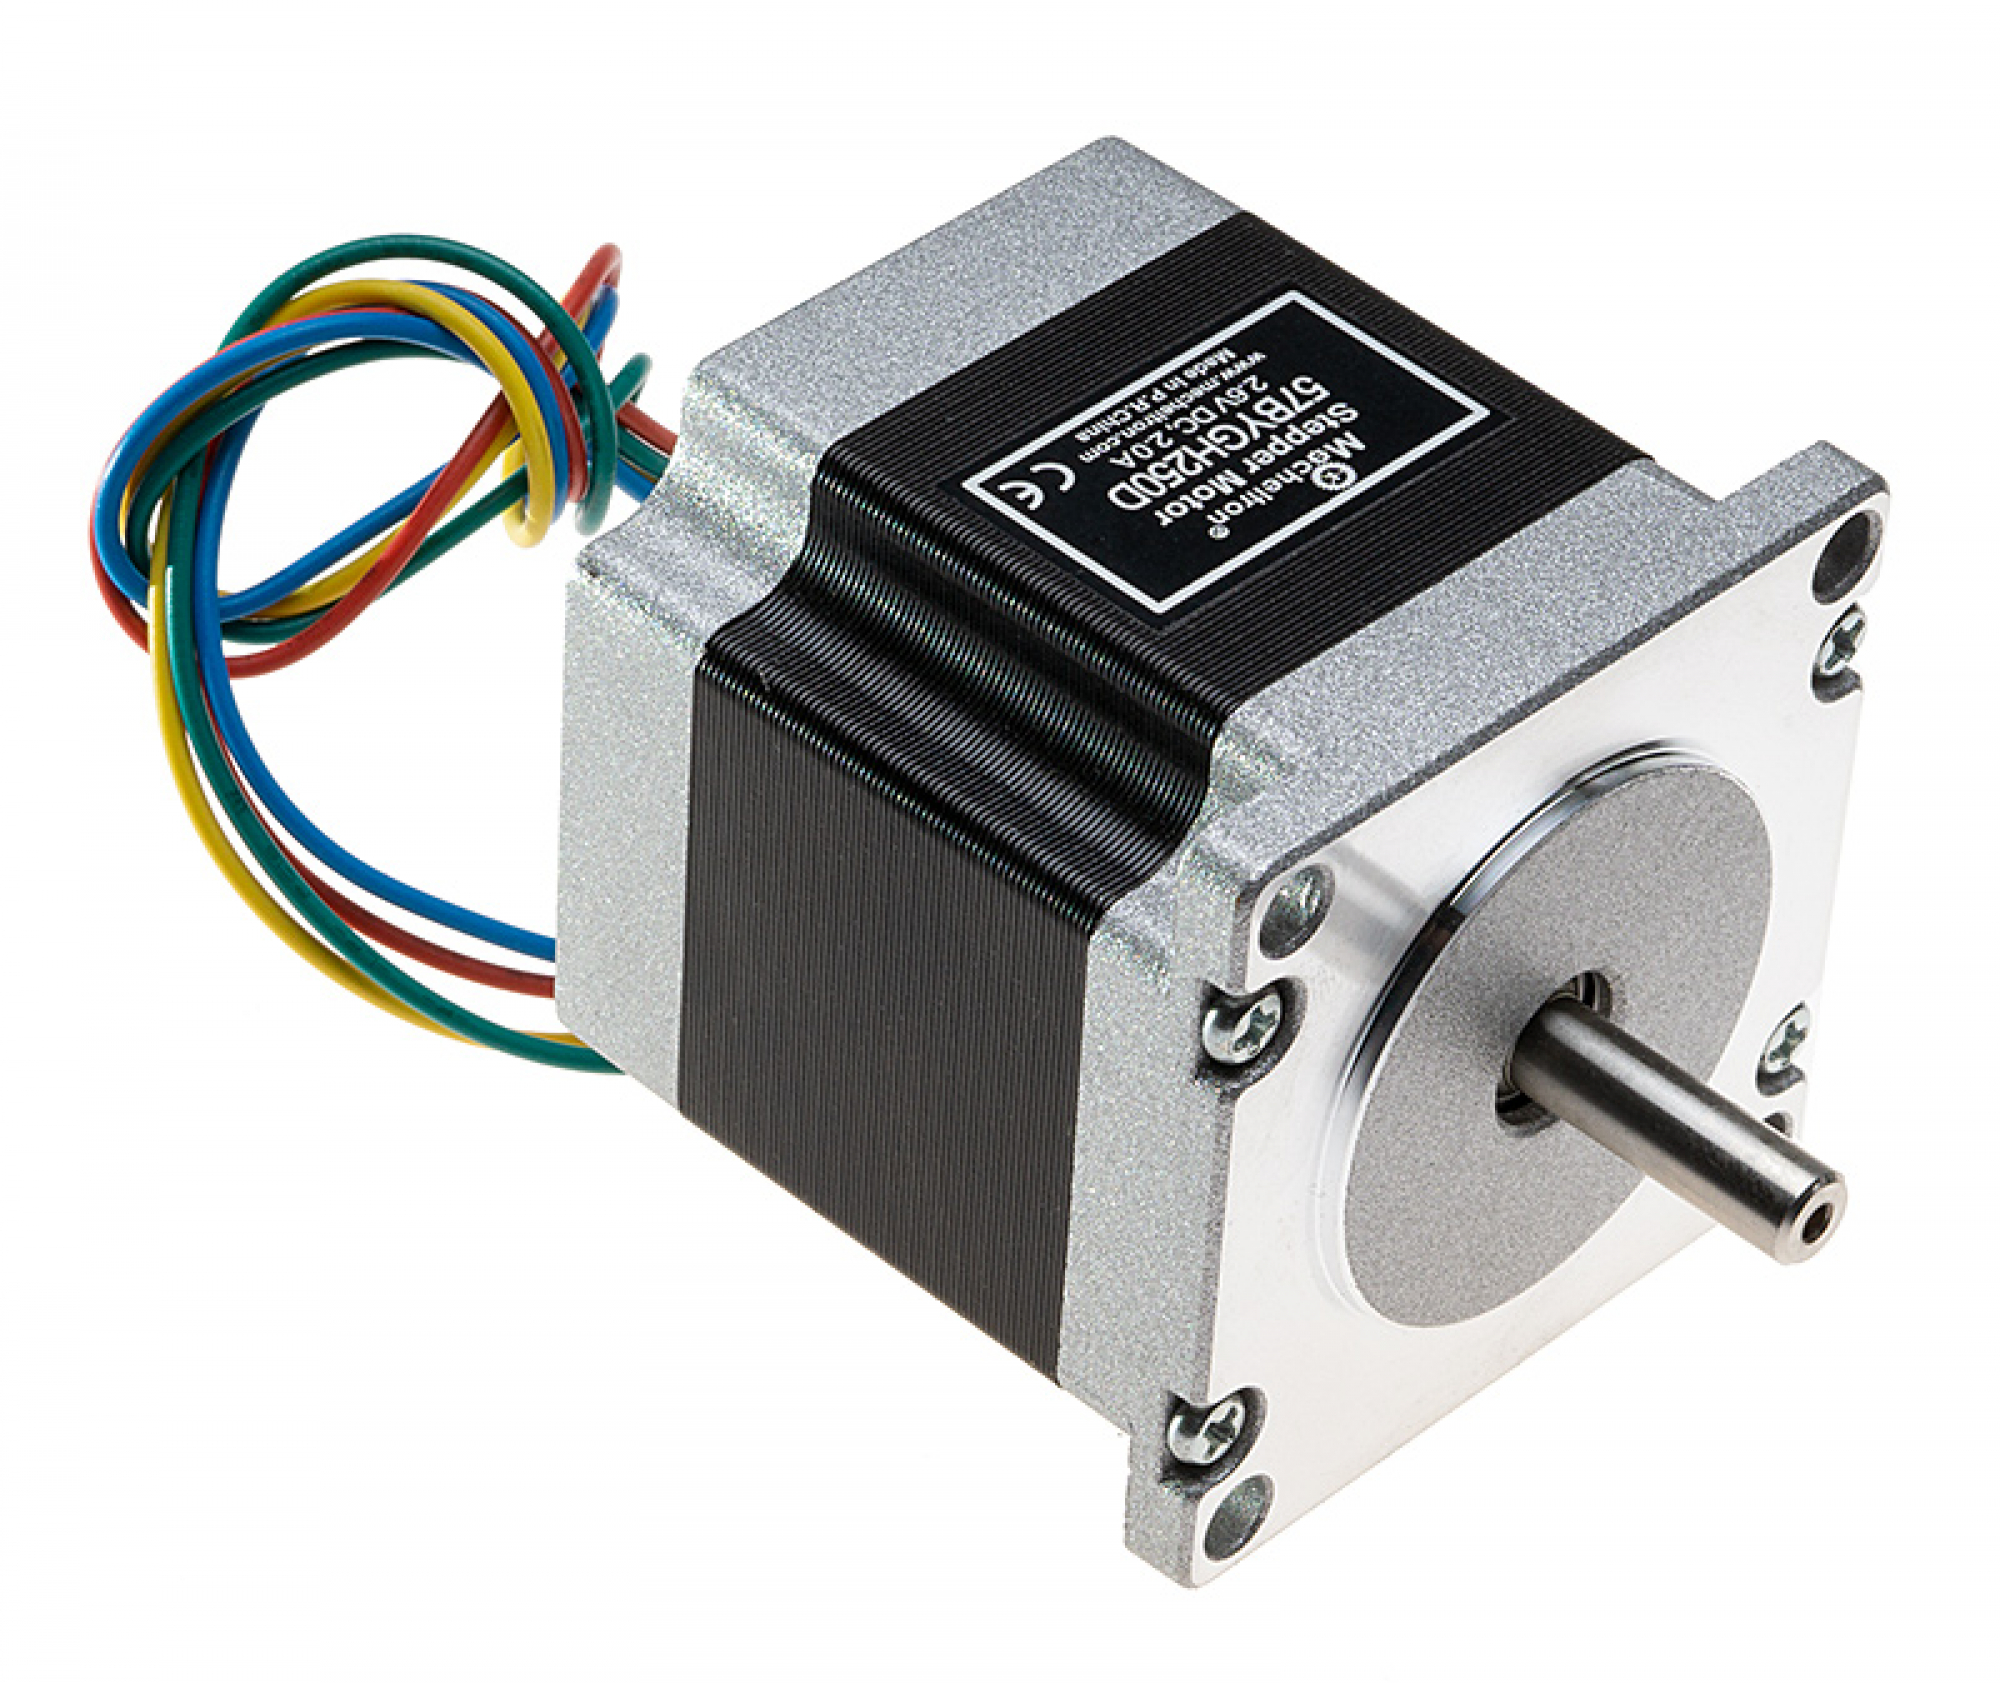 Stepping Motor 2 A 0.95 Nm